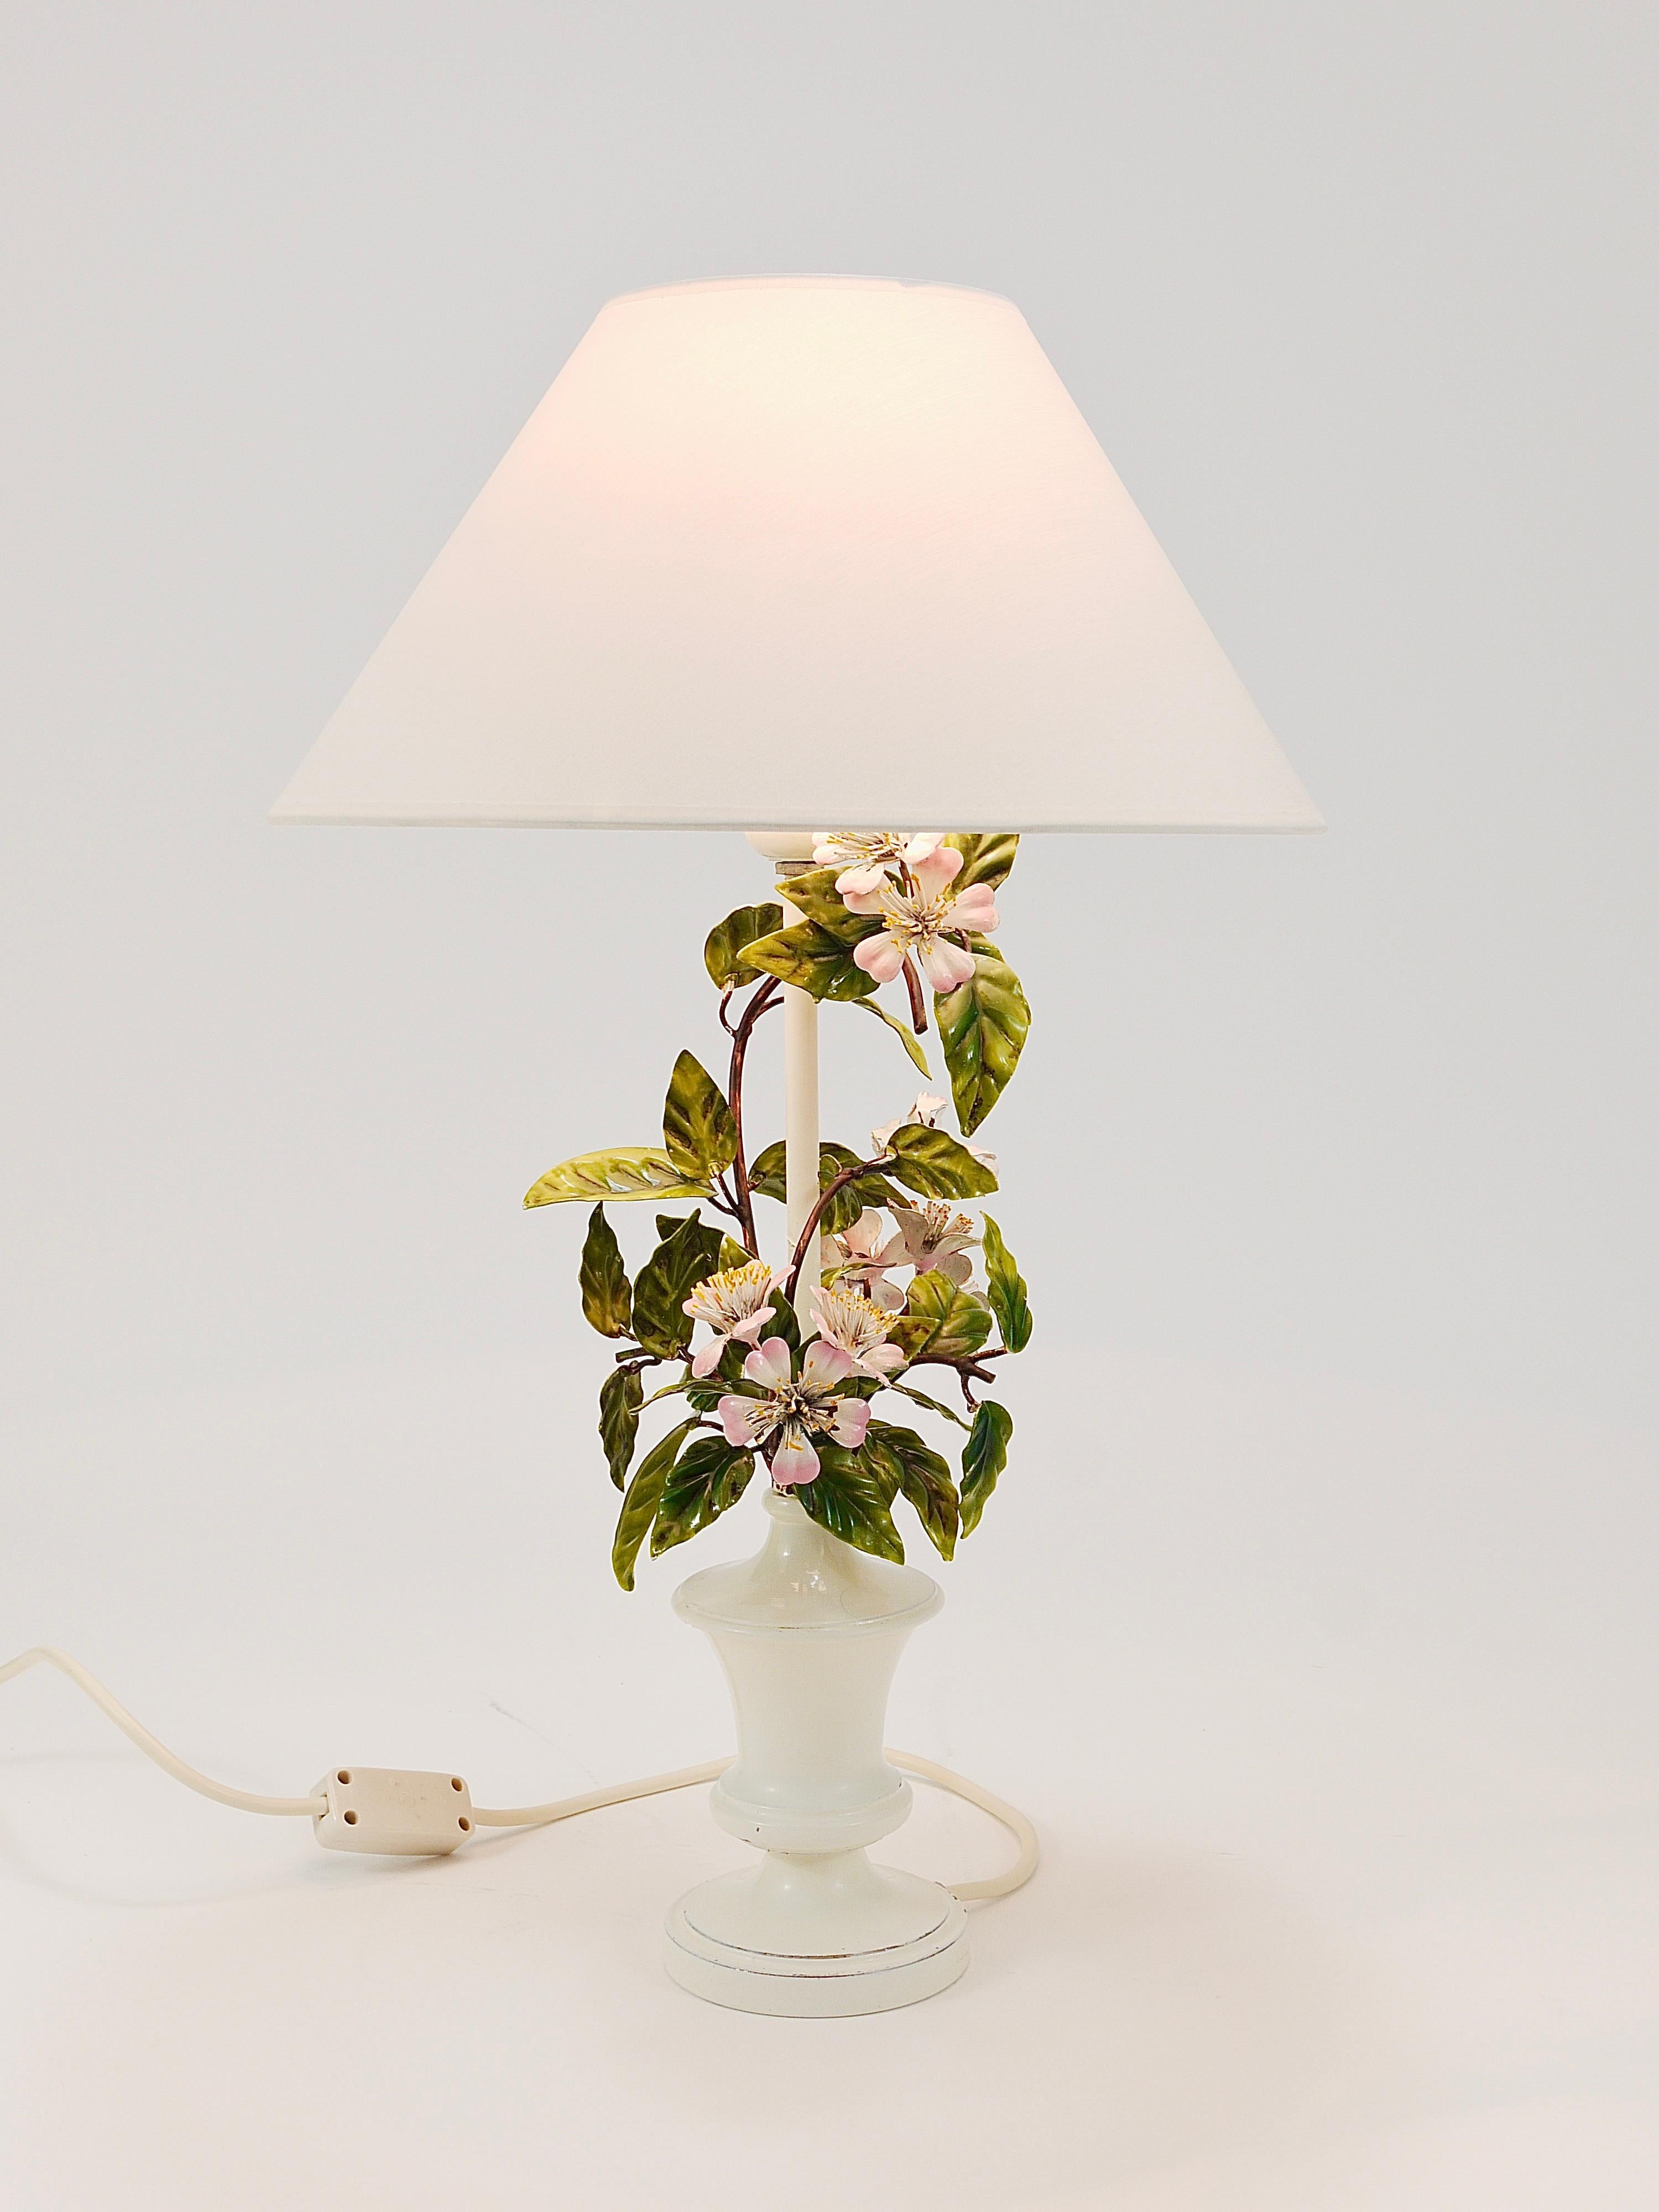 A charming vintage floral side or table lamp from the 1950s, handmade of metal by S. Salvadori, Italy. A lovely colorful Mid-century light with hand-painted wild apple blossoms and leaves. In good condition with age-related patina. Labelled on its